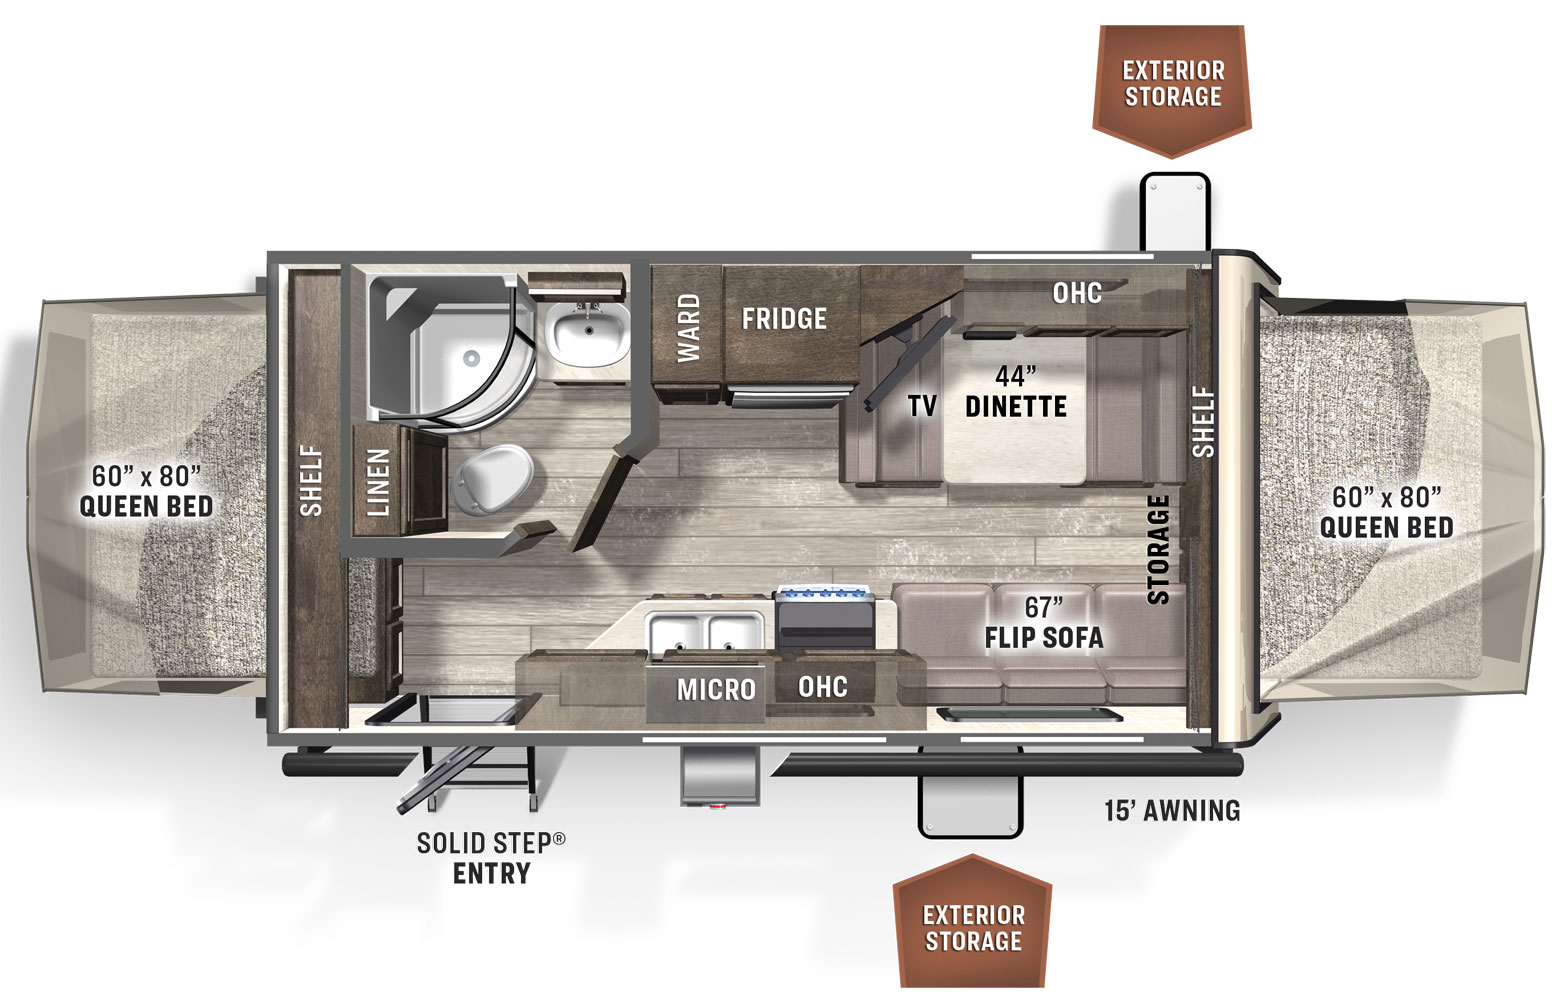 The 19 has no slide outs and one entry door. Exterior features include a 15 foot awning and exterior storage. Interior layout from front to back: queen tent bed; kitchen living area with dinette, flip sofa, community refrigerator, ward, overhead cabinets, and microwave; side aisle bathroom; rear queen tent bed.